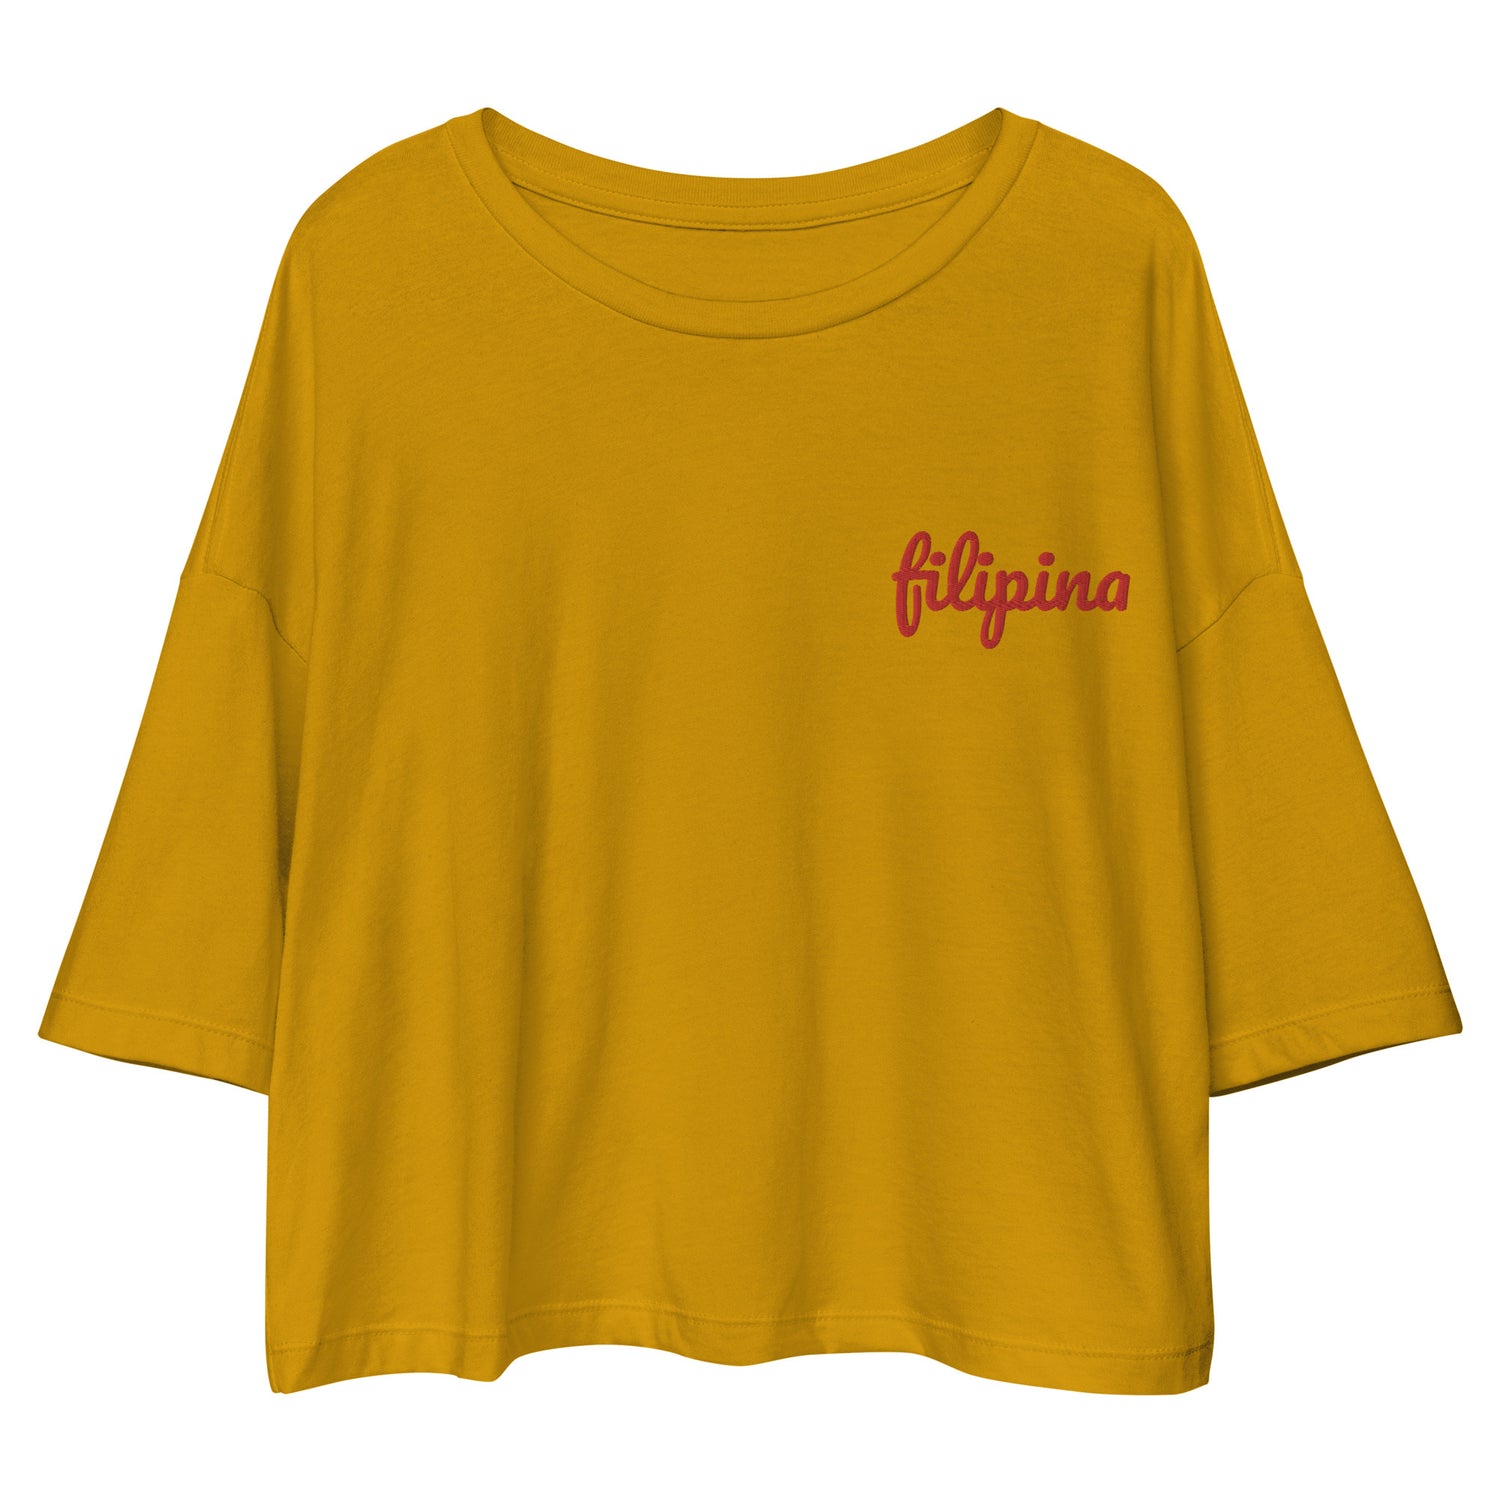 Filipina Embroidered Statement Loose Drop Crop Top in color Mustard.